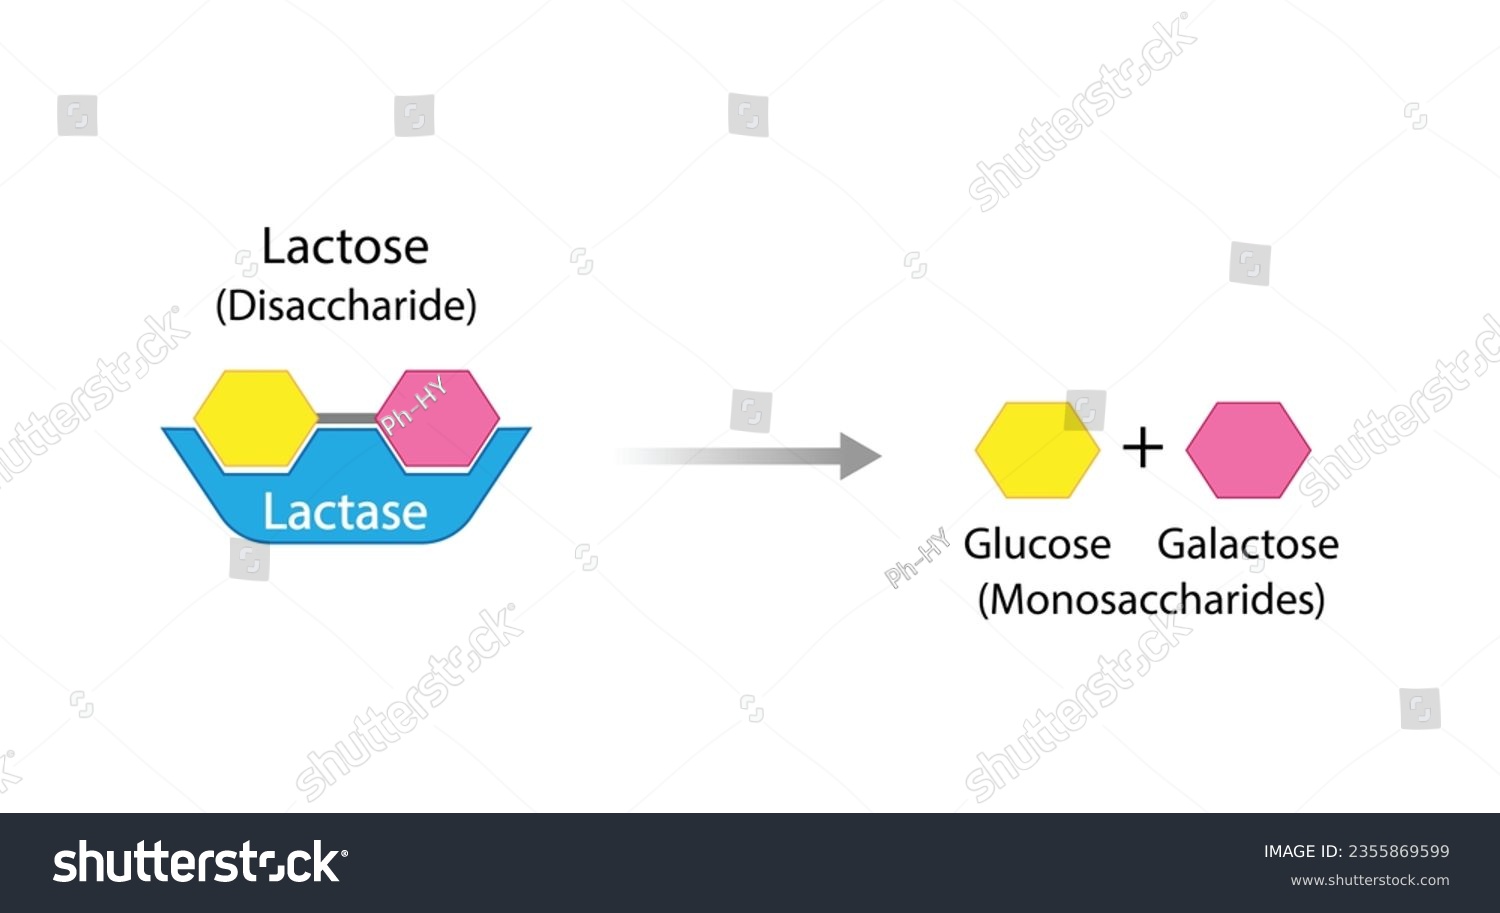 SVG of Lactose digestion. Carbohydrates Digestion. Lactase Enzymes catalyze Disaccharide Lactose Molecule to glucose and galactose. Glucose Sugar Formation. Scientific Diagram. Vector Illustration. svg